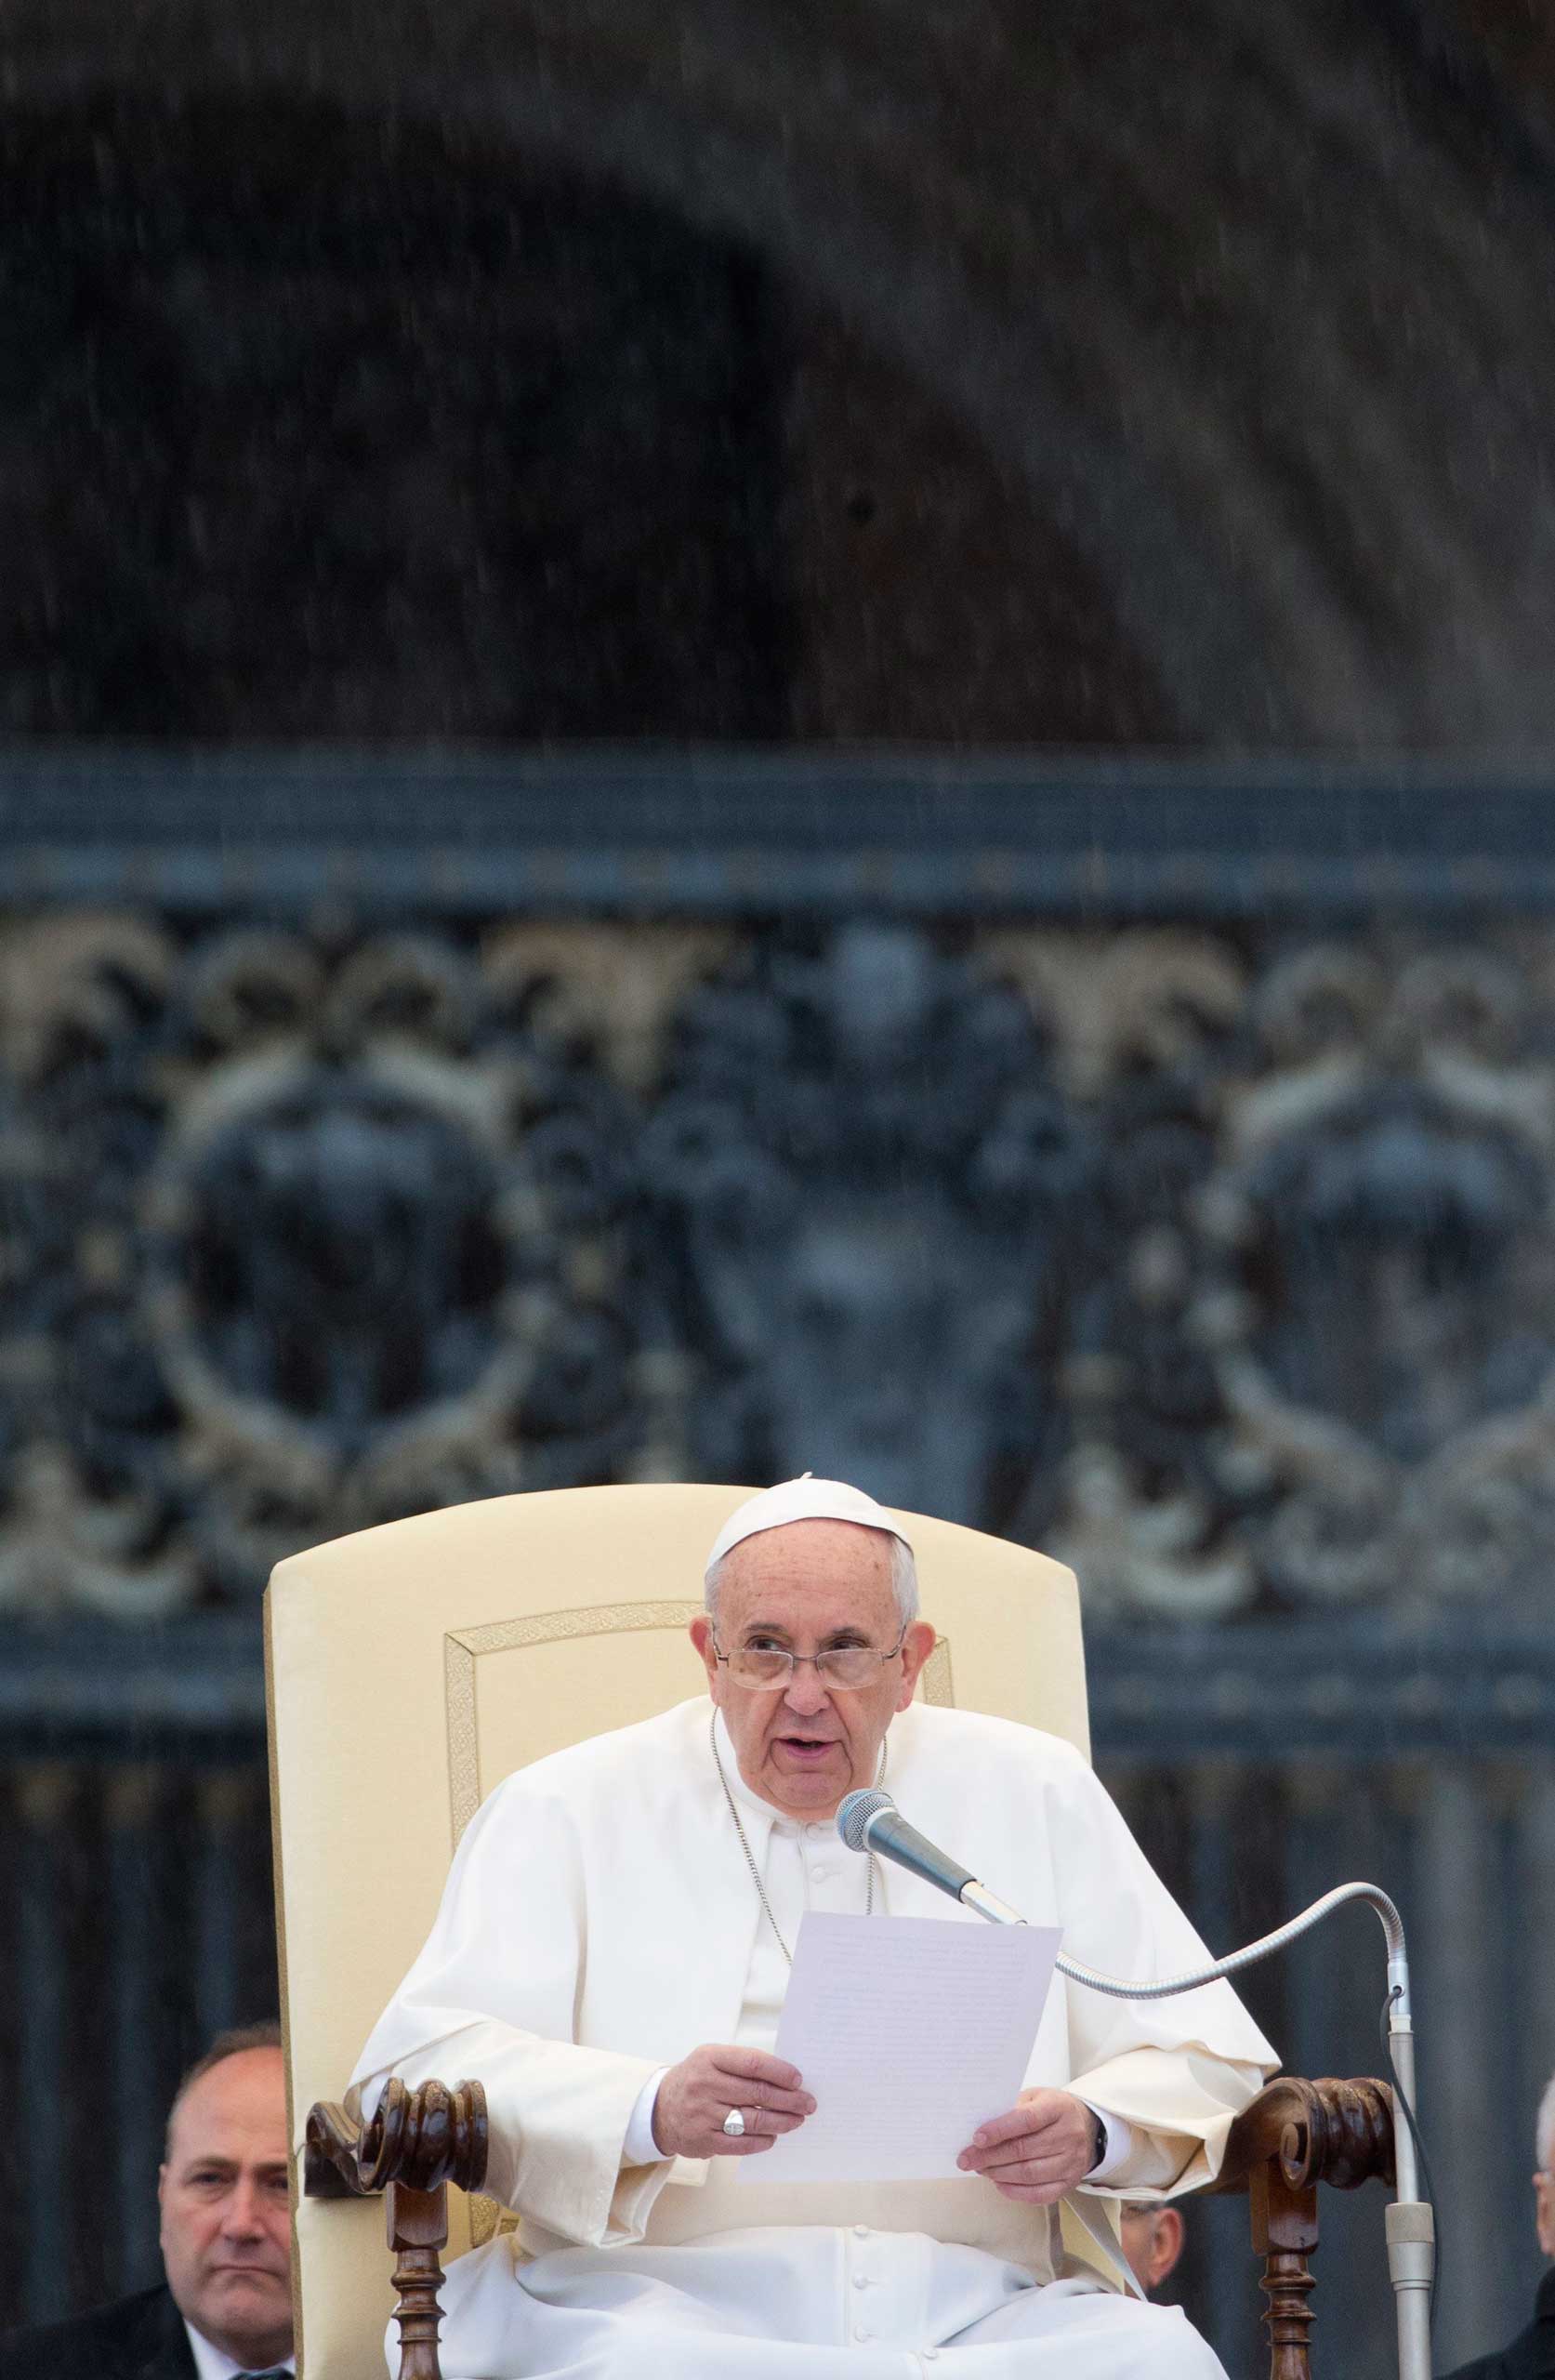 Pope Francis speaks during his weekly general audience in St. Peter's Square at the Vatican, March 25, 2015. (Andrew Medichini—AP)